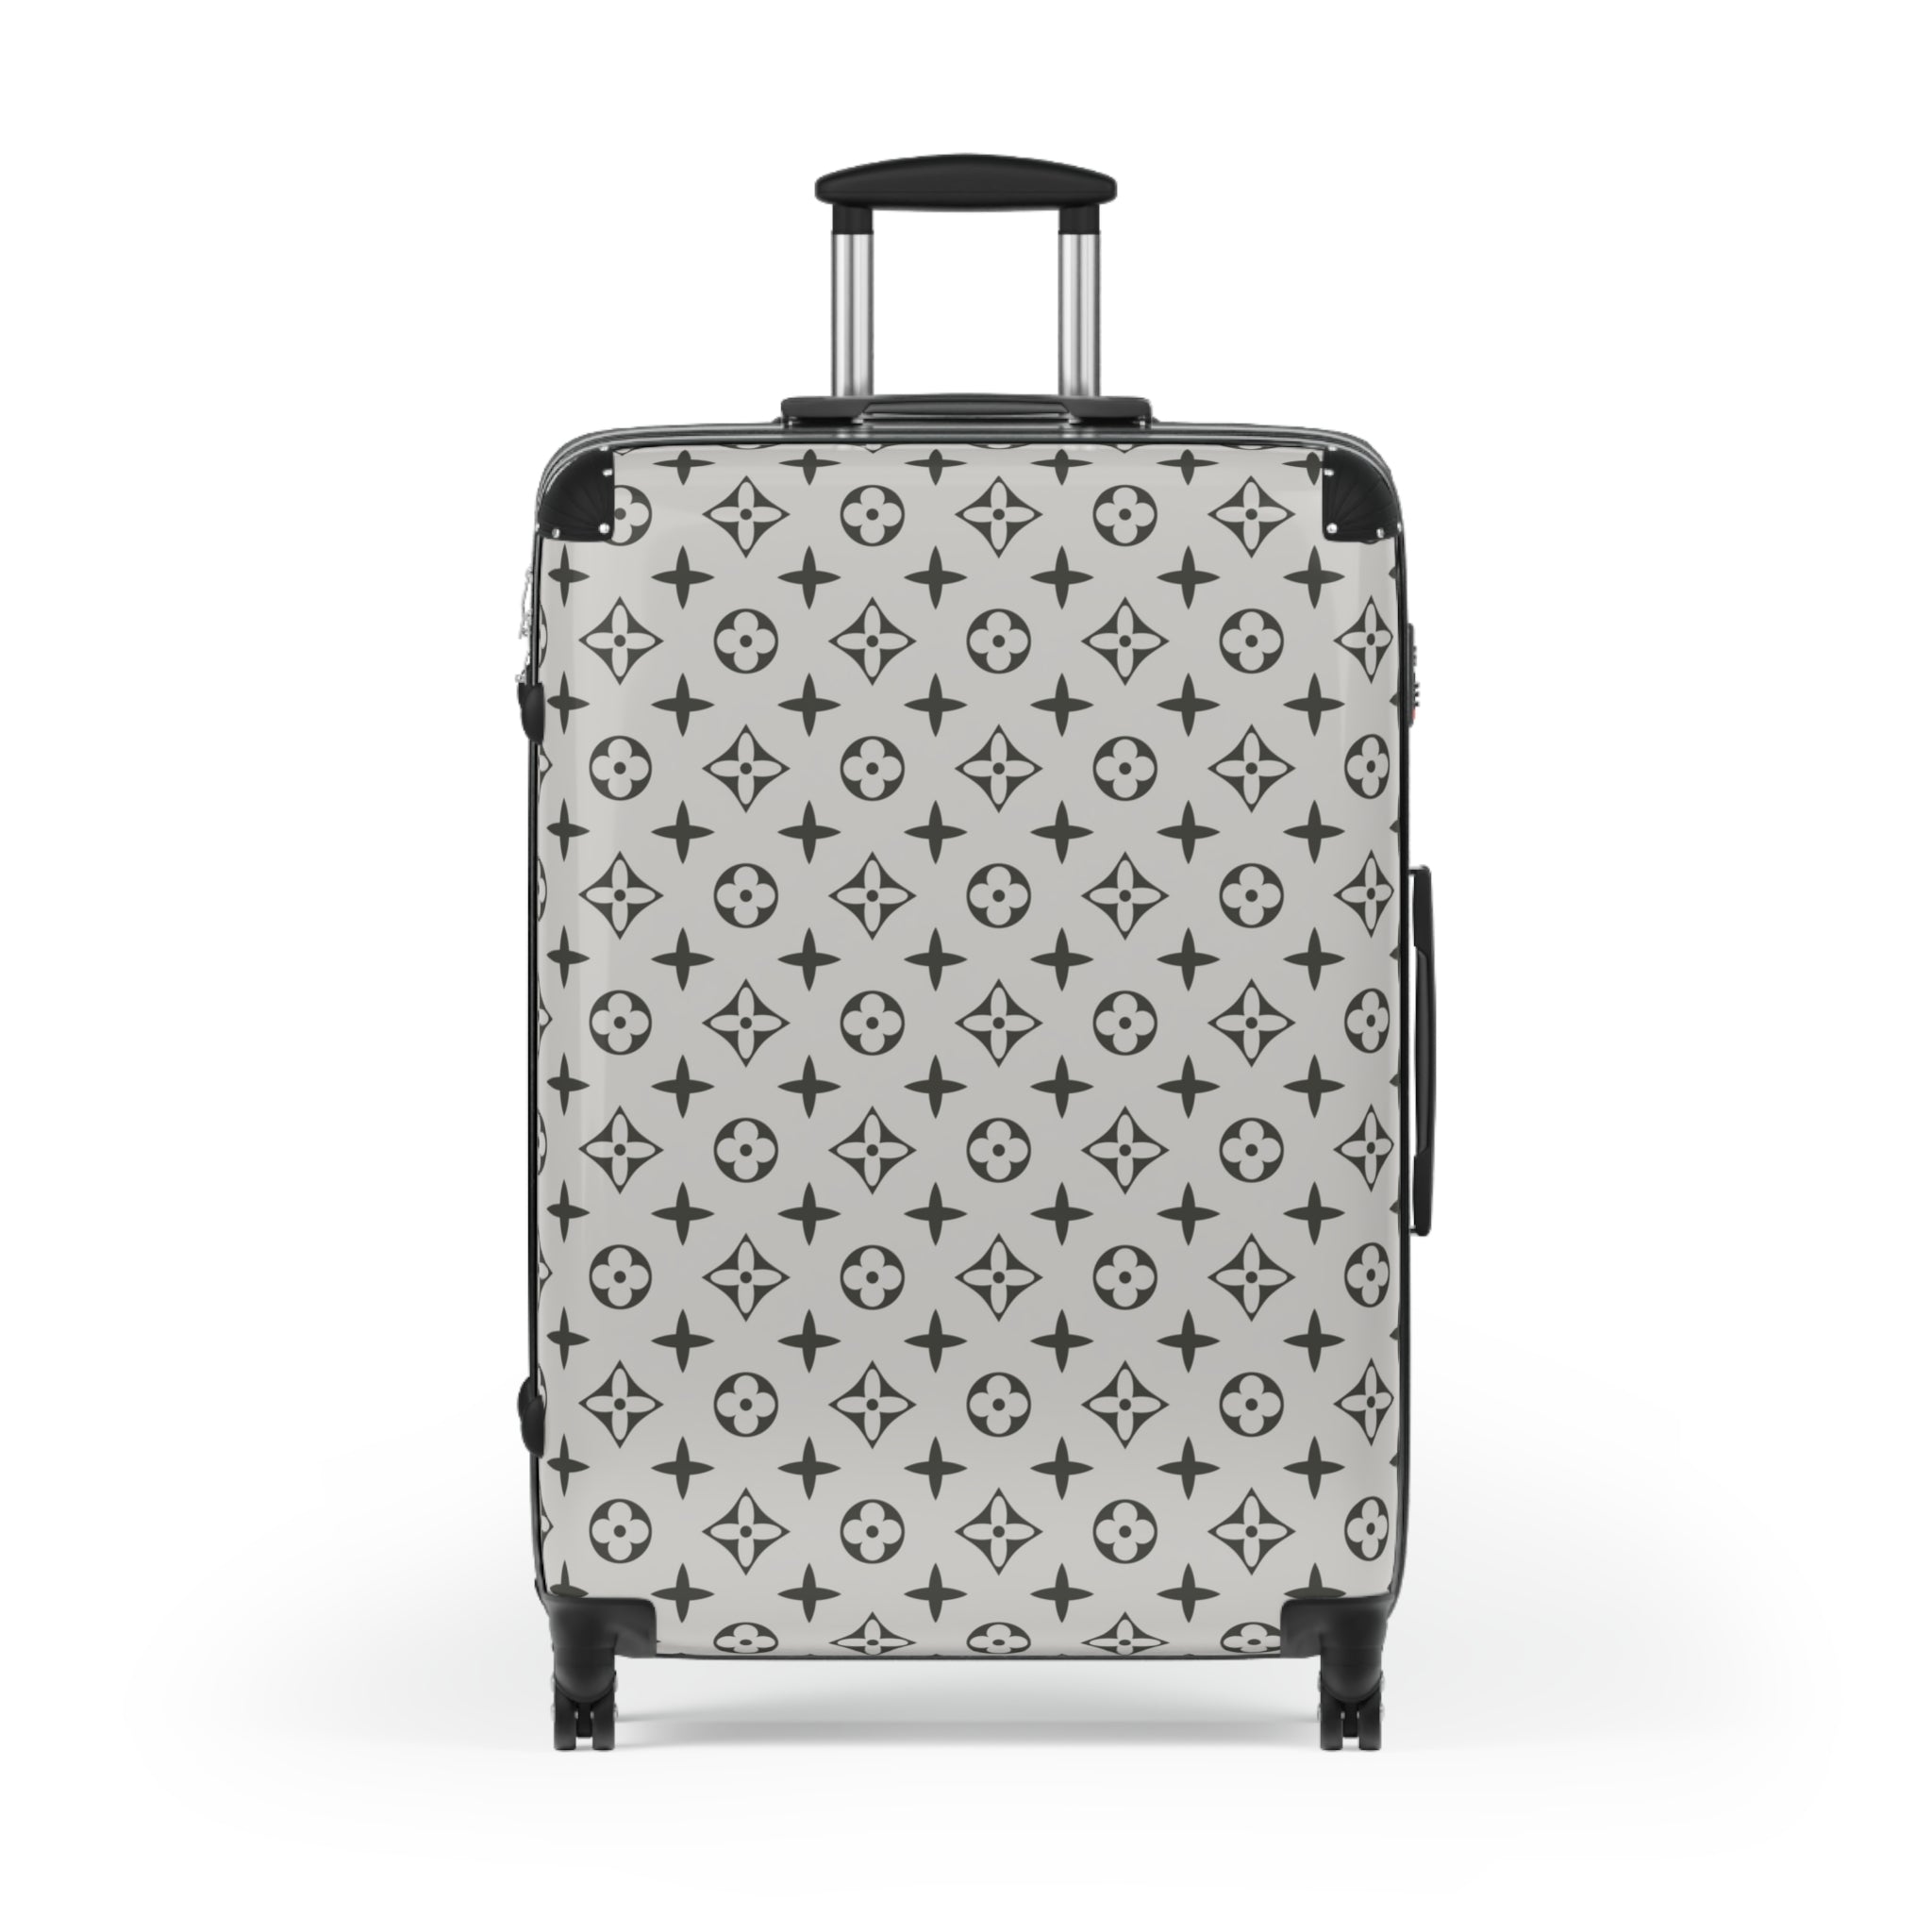 Abby Travel Collection Large Grey Icon Suitcase, Hard Shell Luggage, Rolling Suitcase for Travel, Carry On Bag Bags Large-Black The Middle Aged Groove